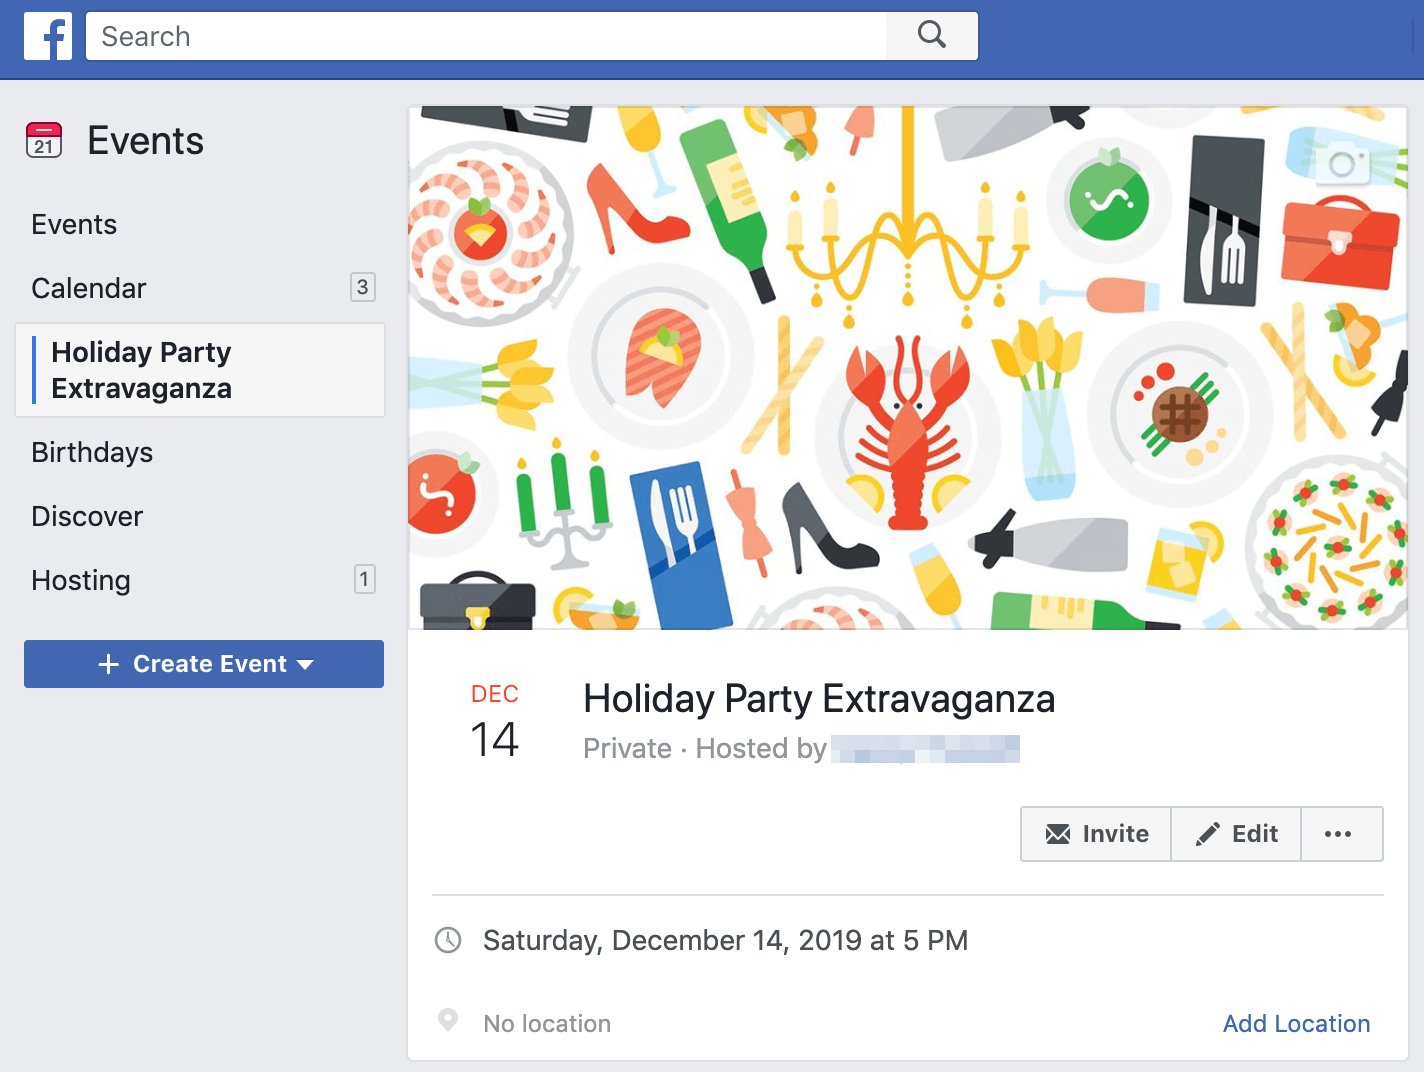 Example of a Facebook event